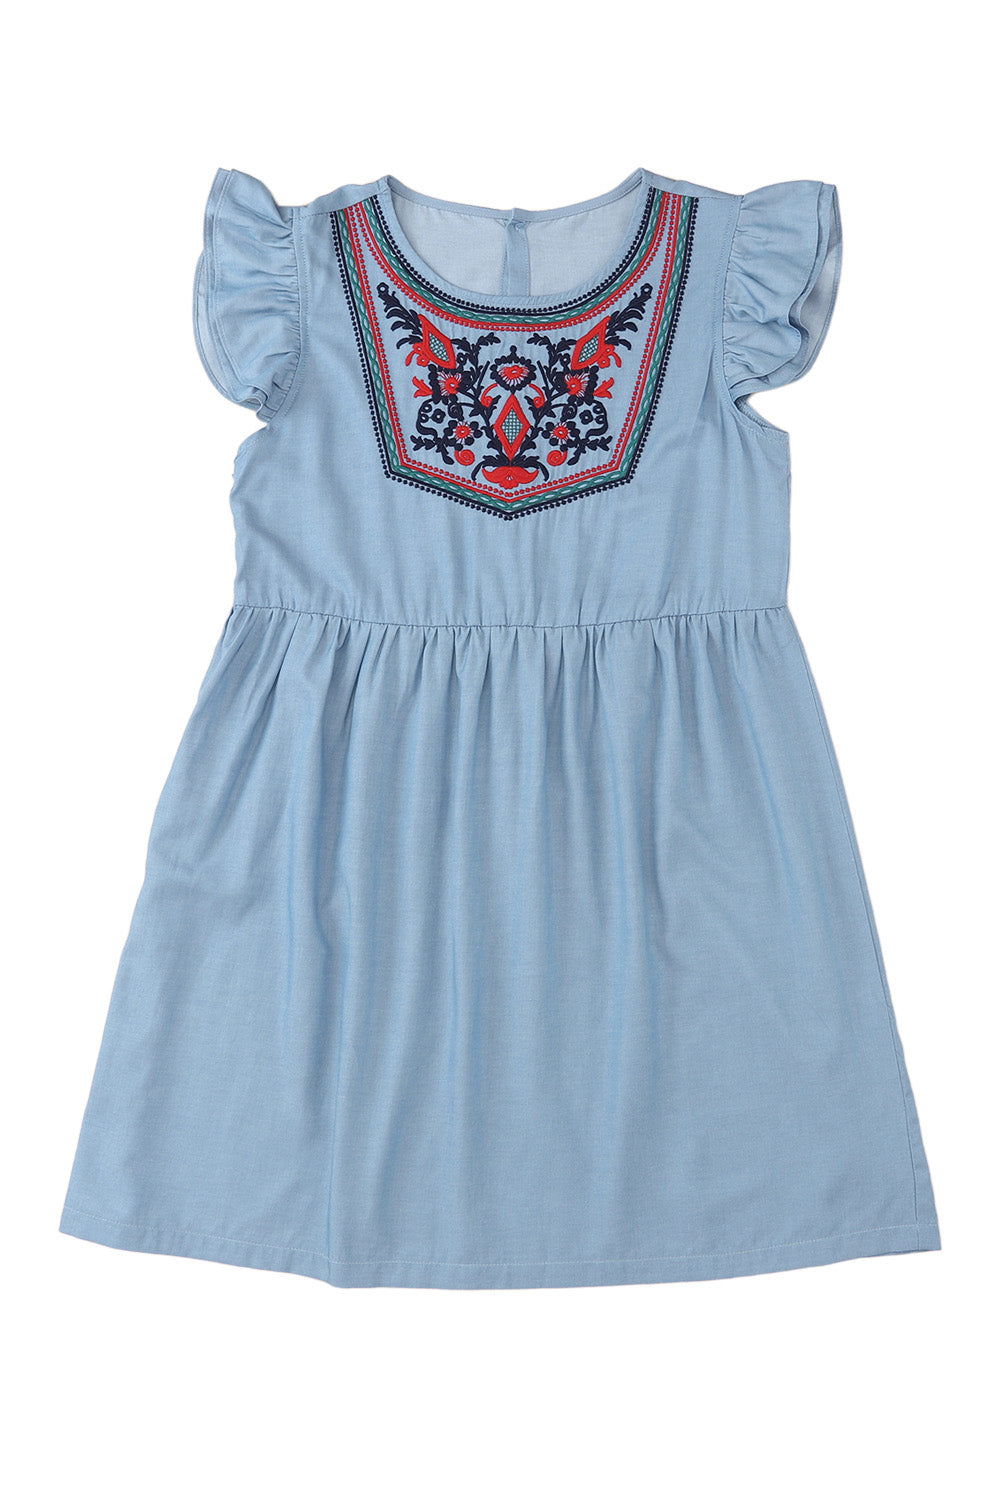 Sky Blue Floral Embroidered Ruffled Sleeve Mini Dress